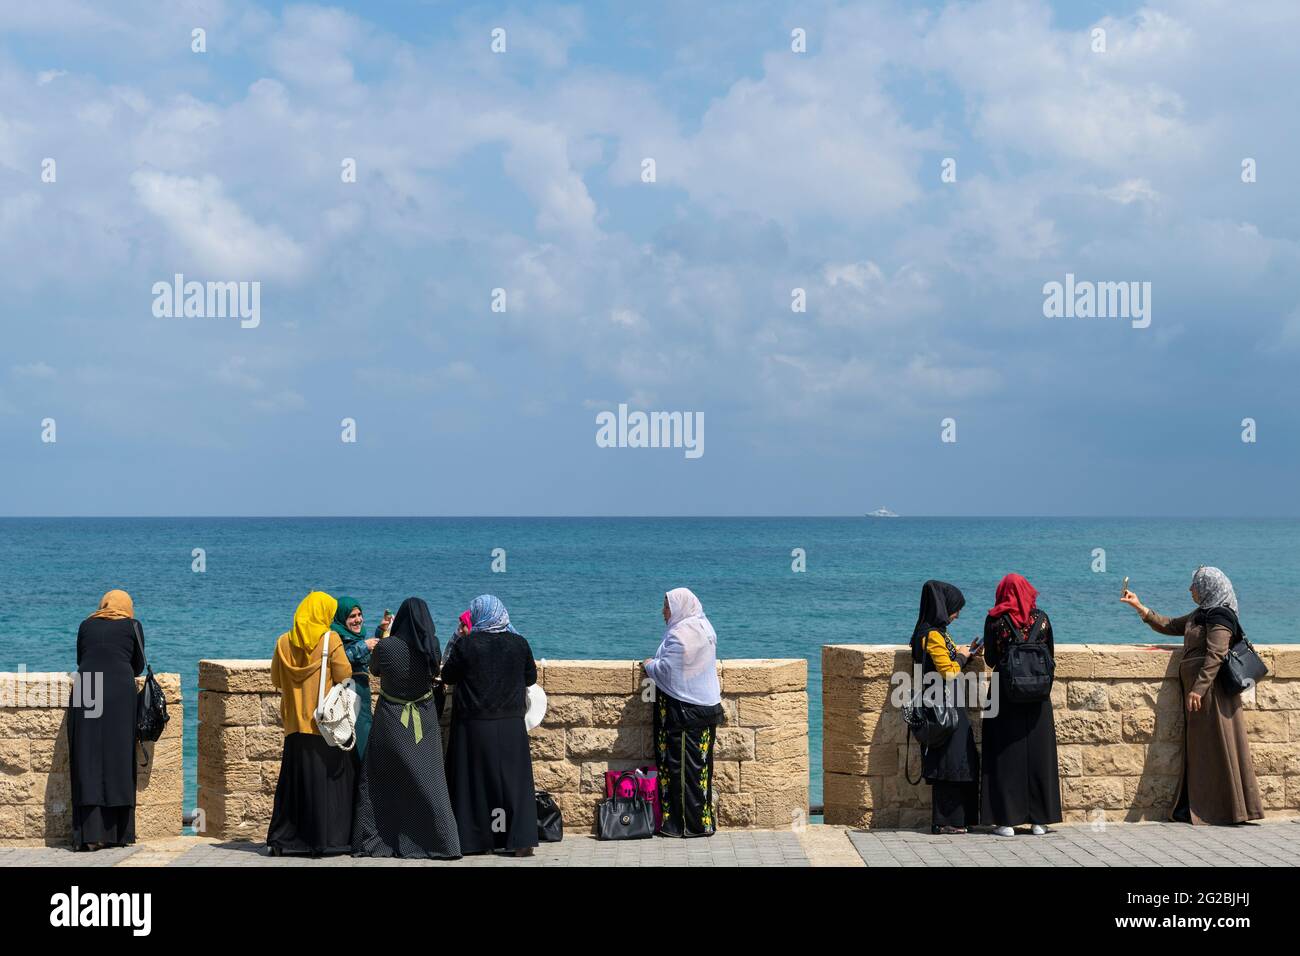 Muslim women wearing headscarf - hijab, enjoying on the beach, Jaffa. Tel Aviv. Religious garments have become more common among Muslims in Israel Stock Photo